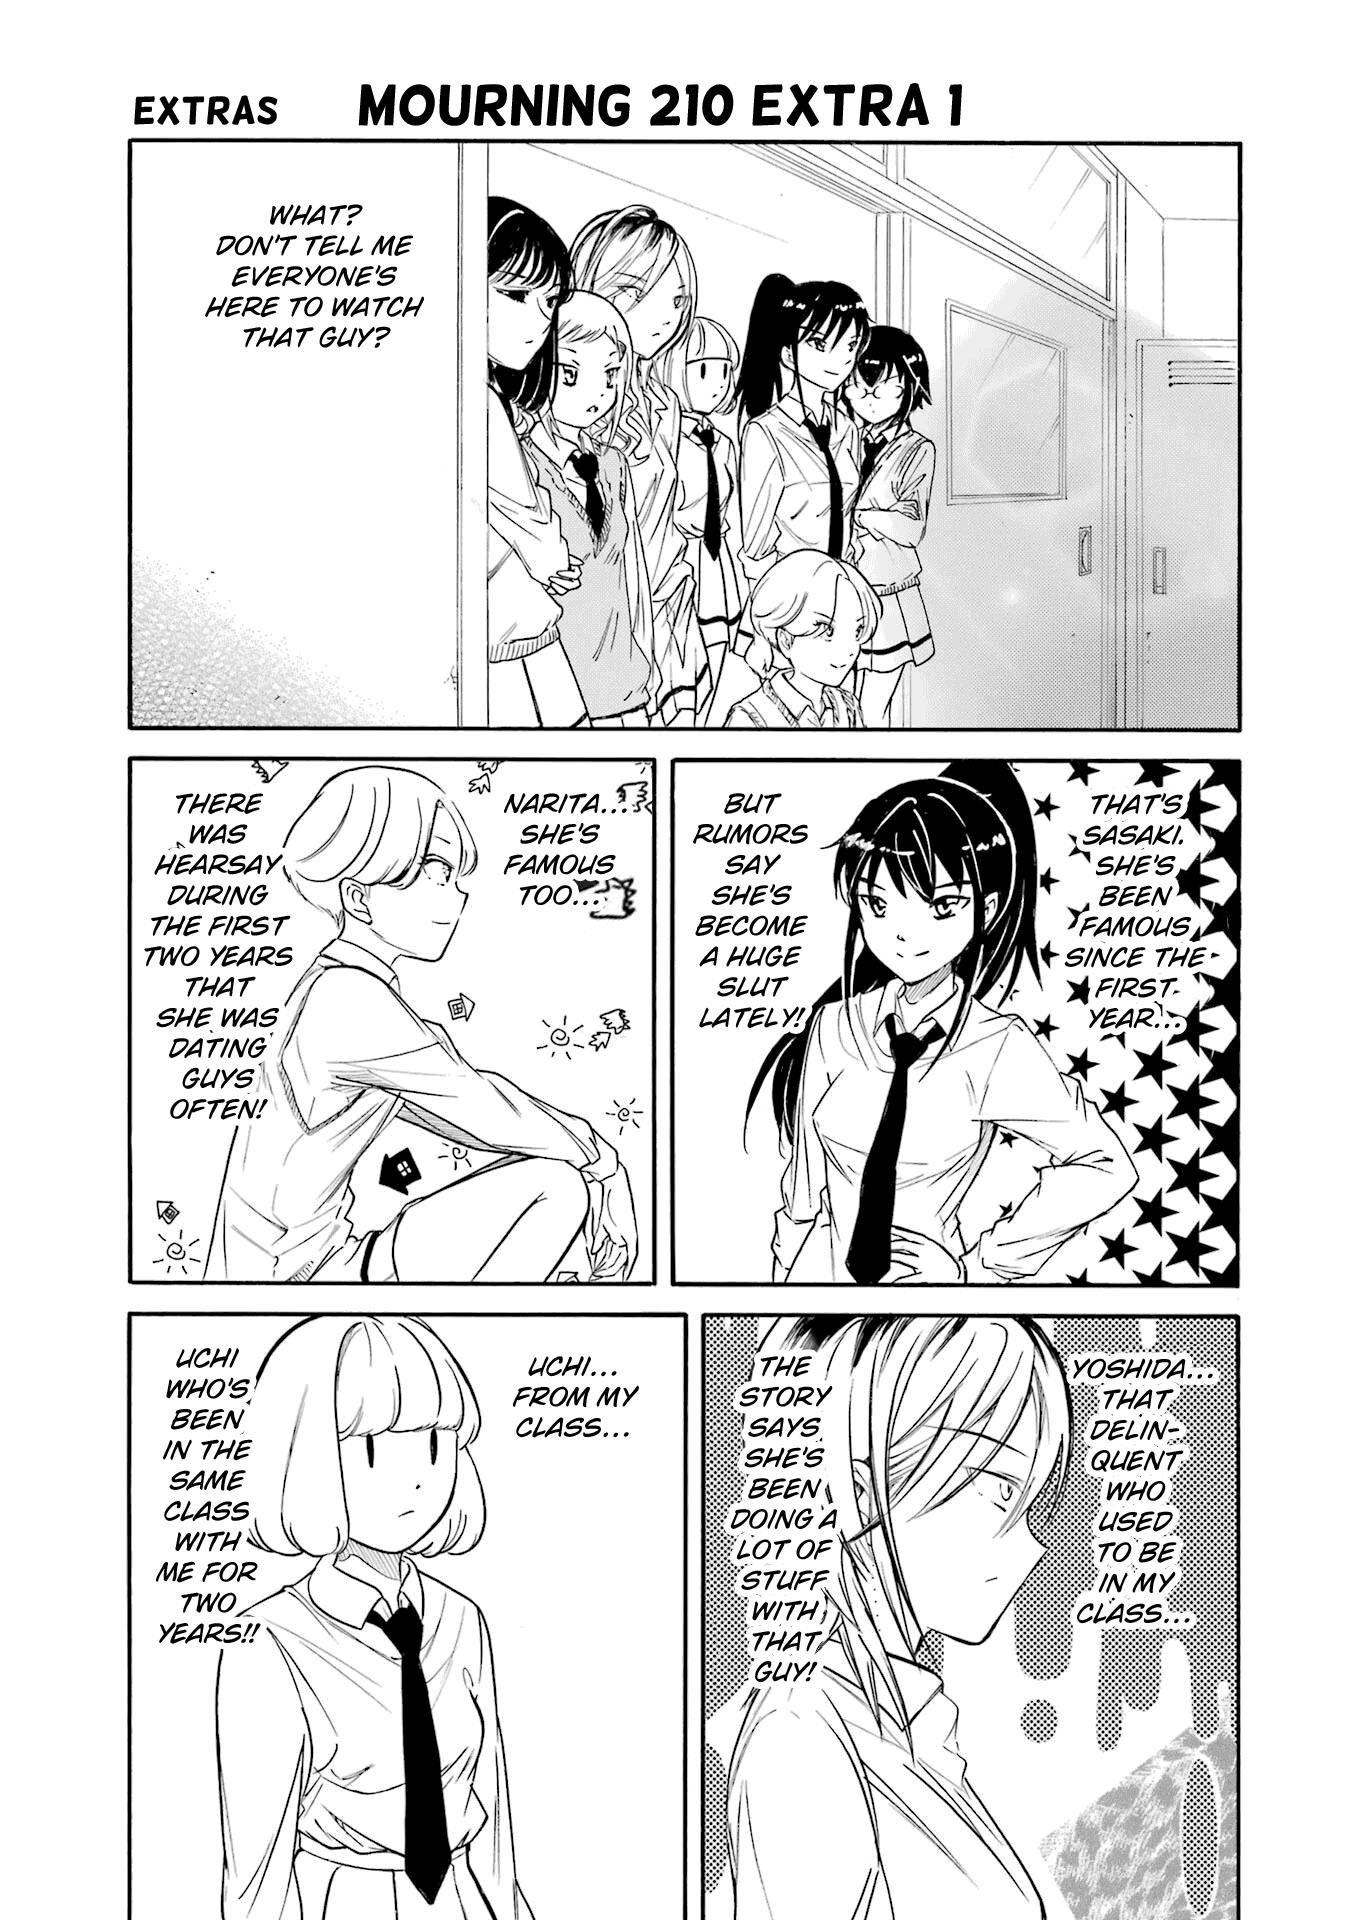 It's Not My Fault That I'm Not Popular! Vol.23 Chapter 212.5